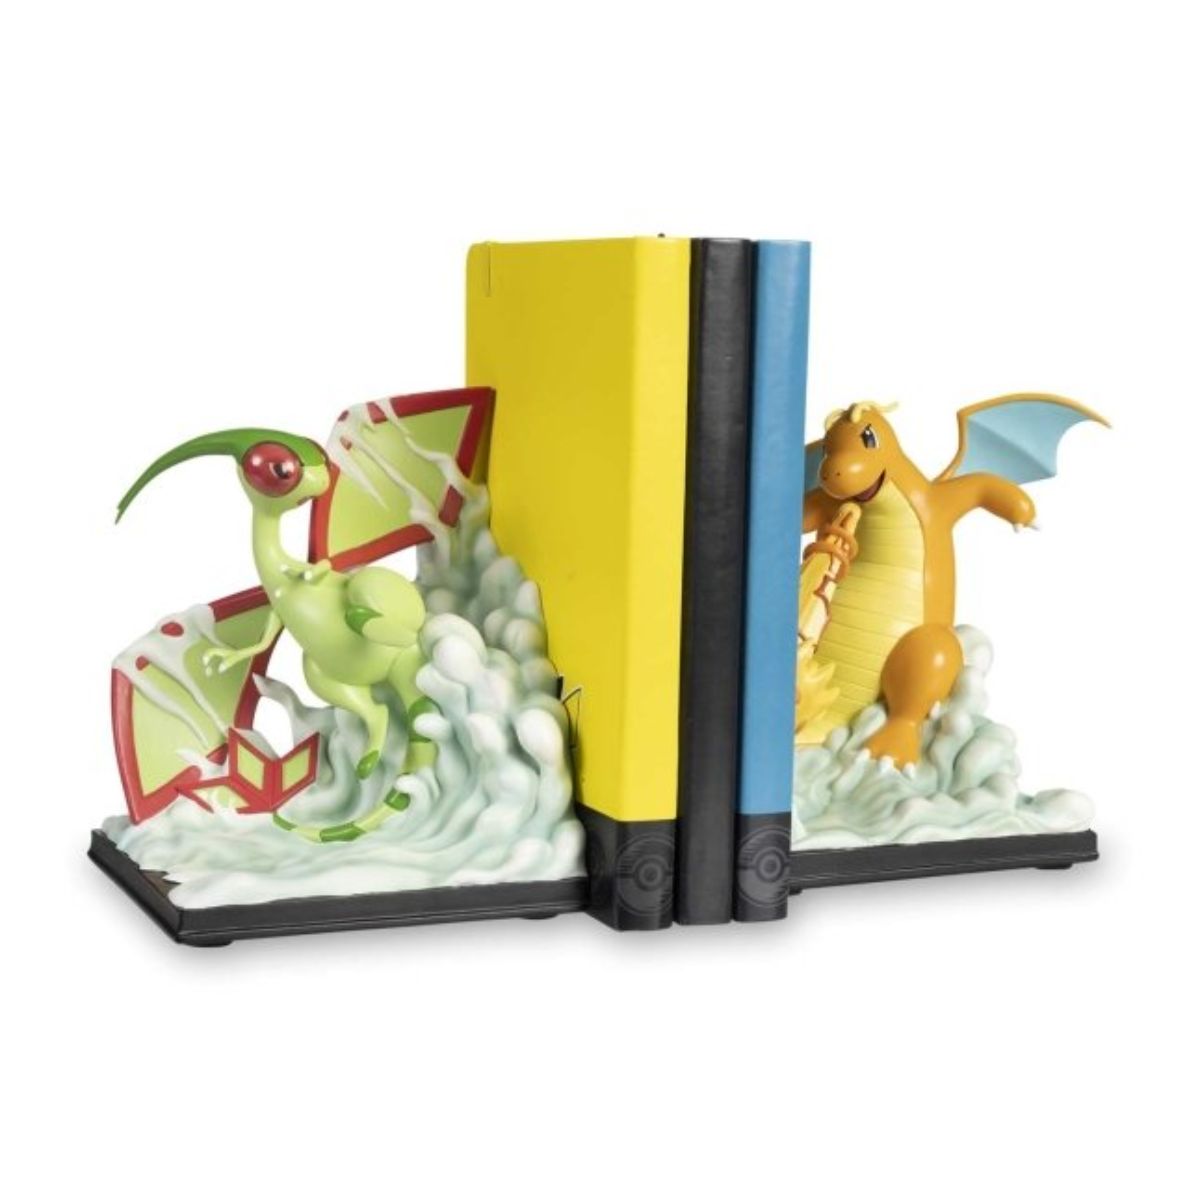 Pokemon Center Clashing Dragons Bookends &quot;Dragonite &amp; Flygon&quot; (2 Pieces)-Pokemon Centre-Ace Cards &amp; Collectibles